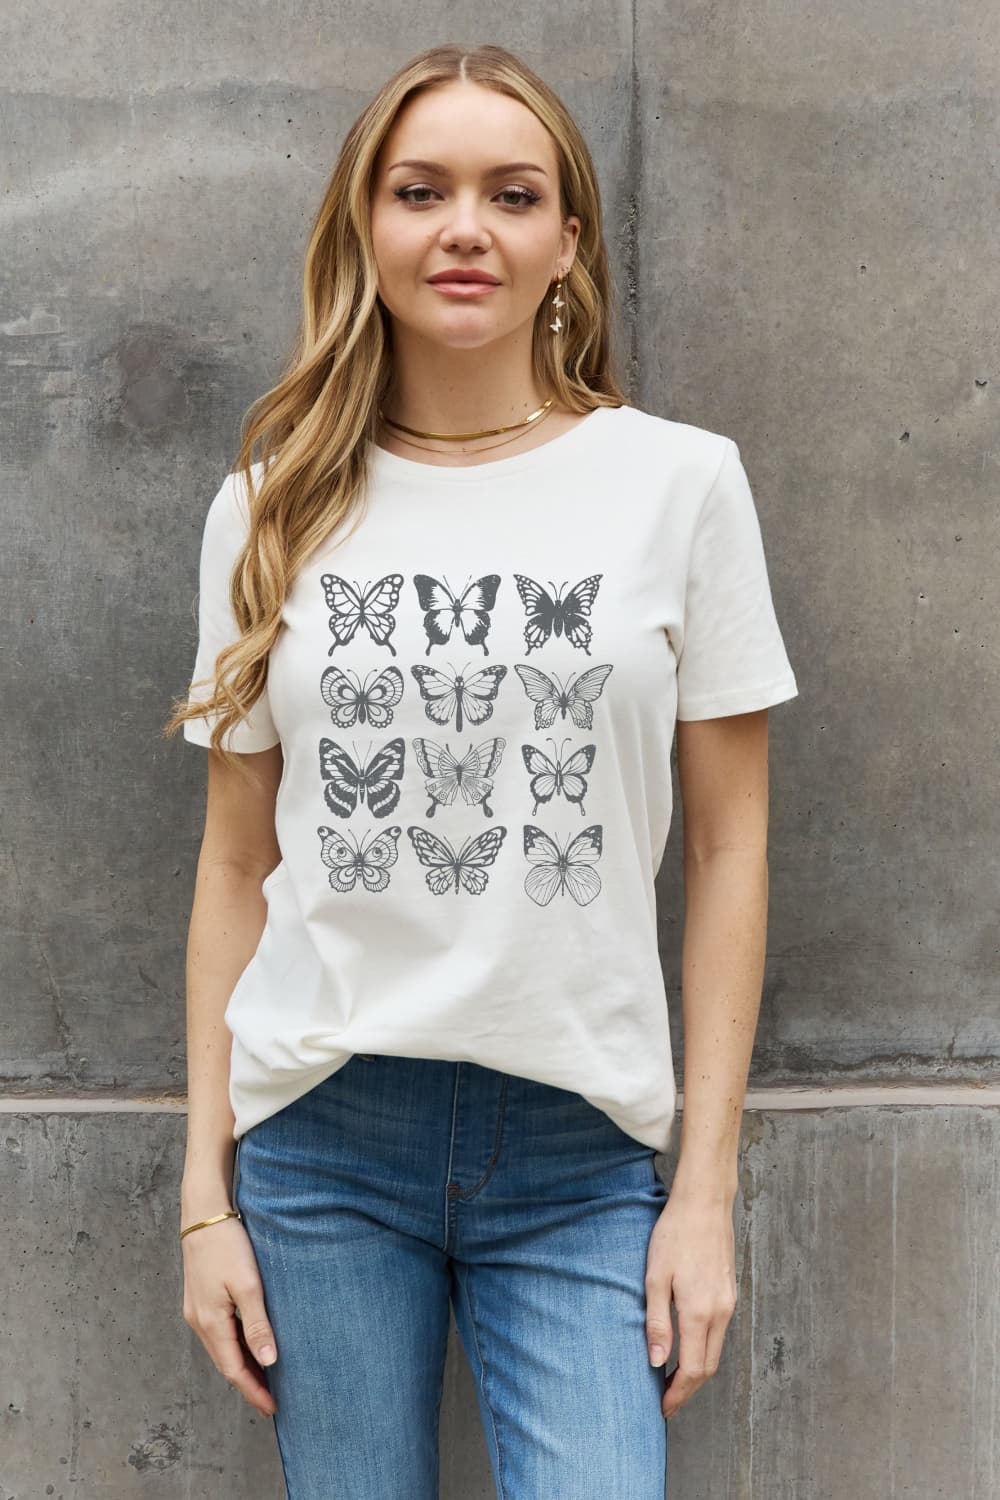 Simply Love Butterfly Graphic Cotton T-Shirt